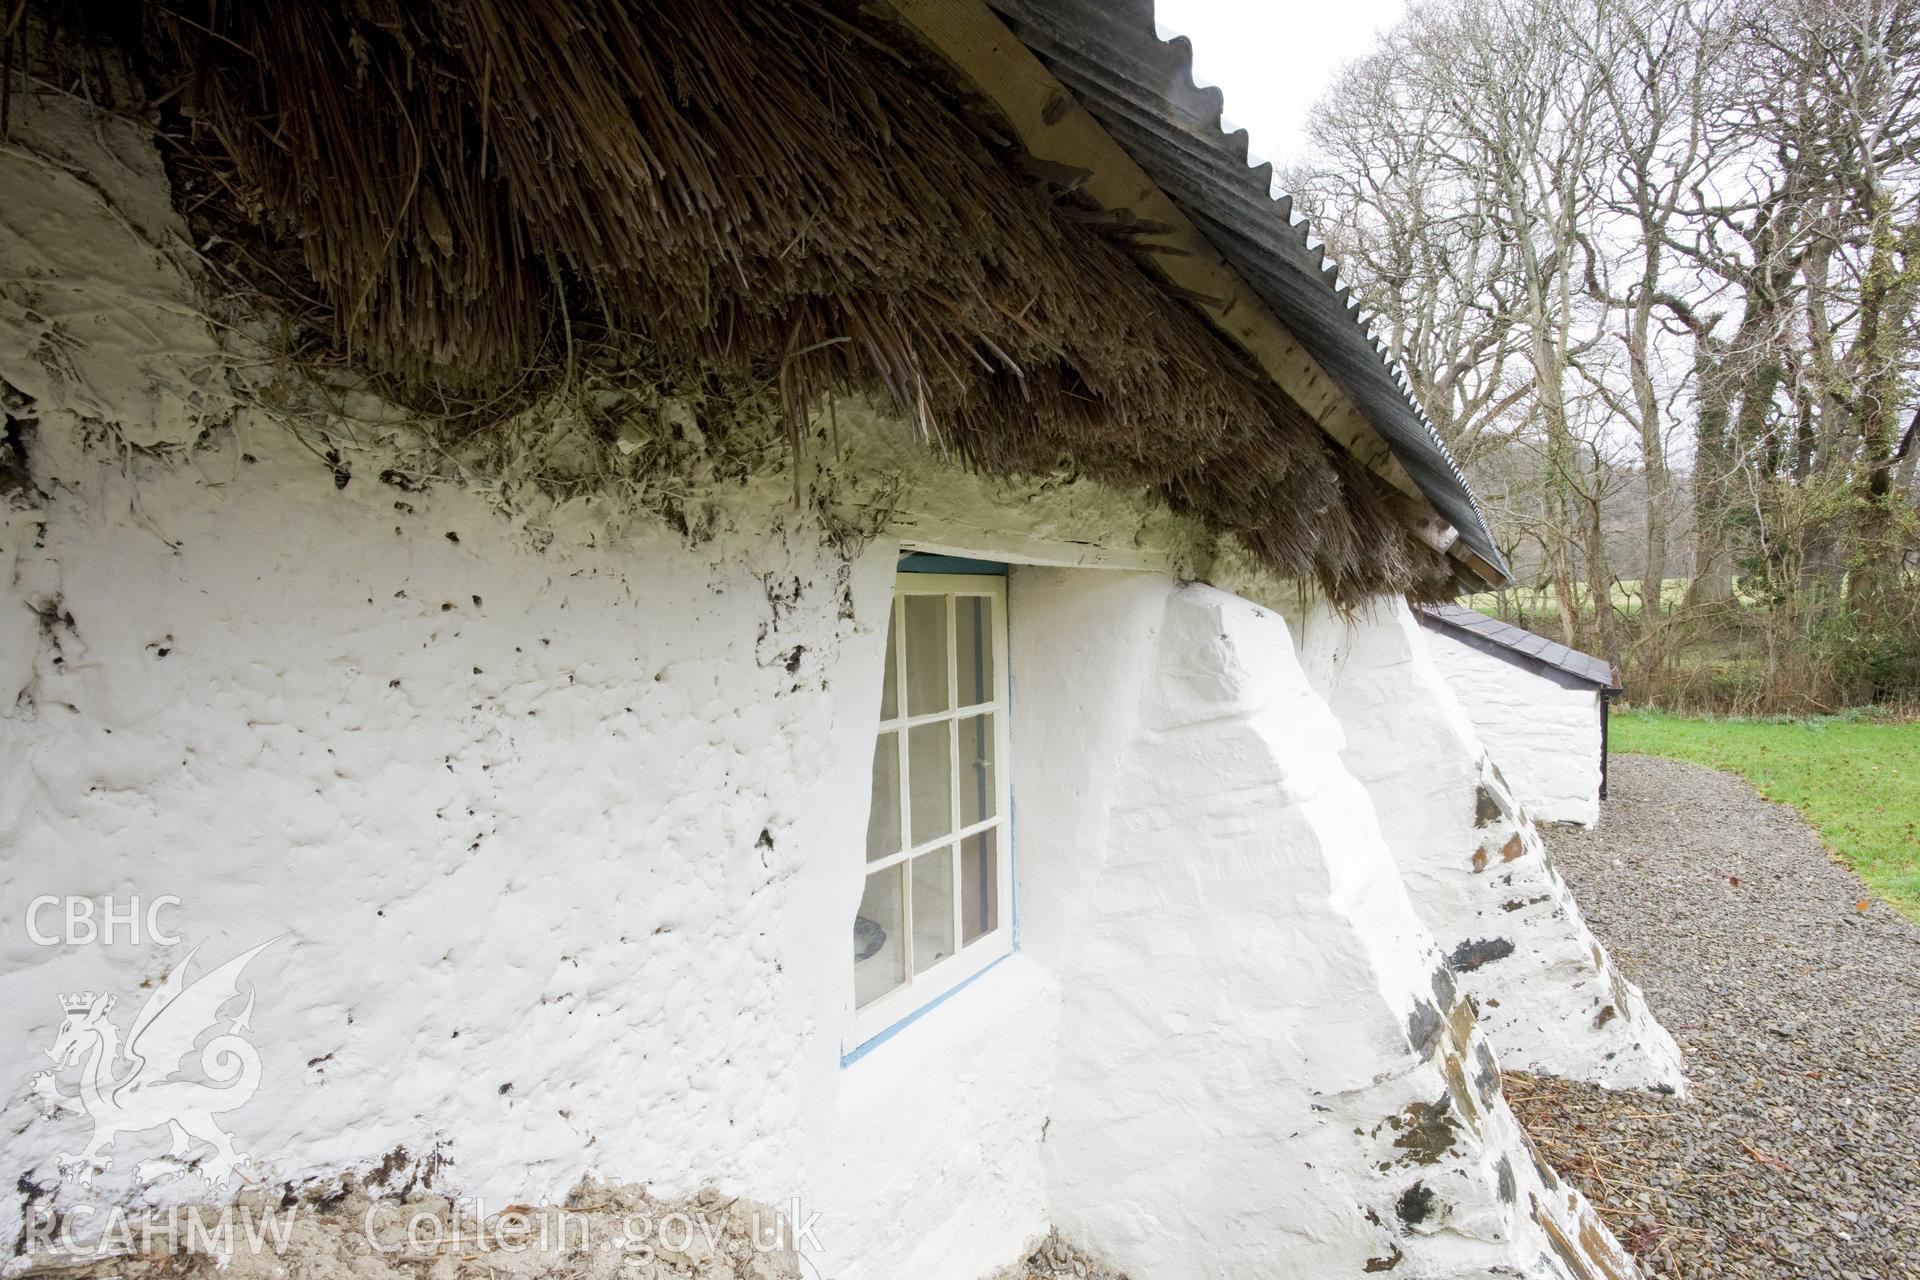 Detail of southeast wall showing surviving underthatch.